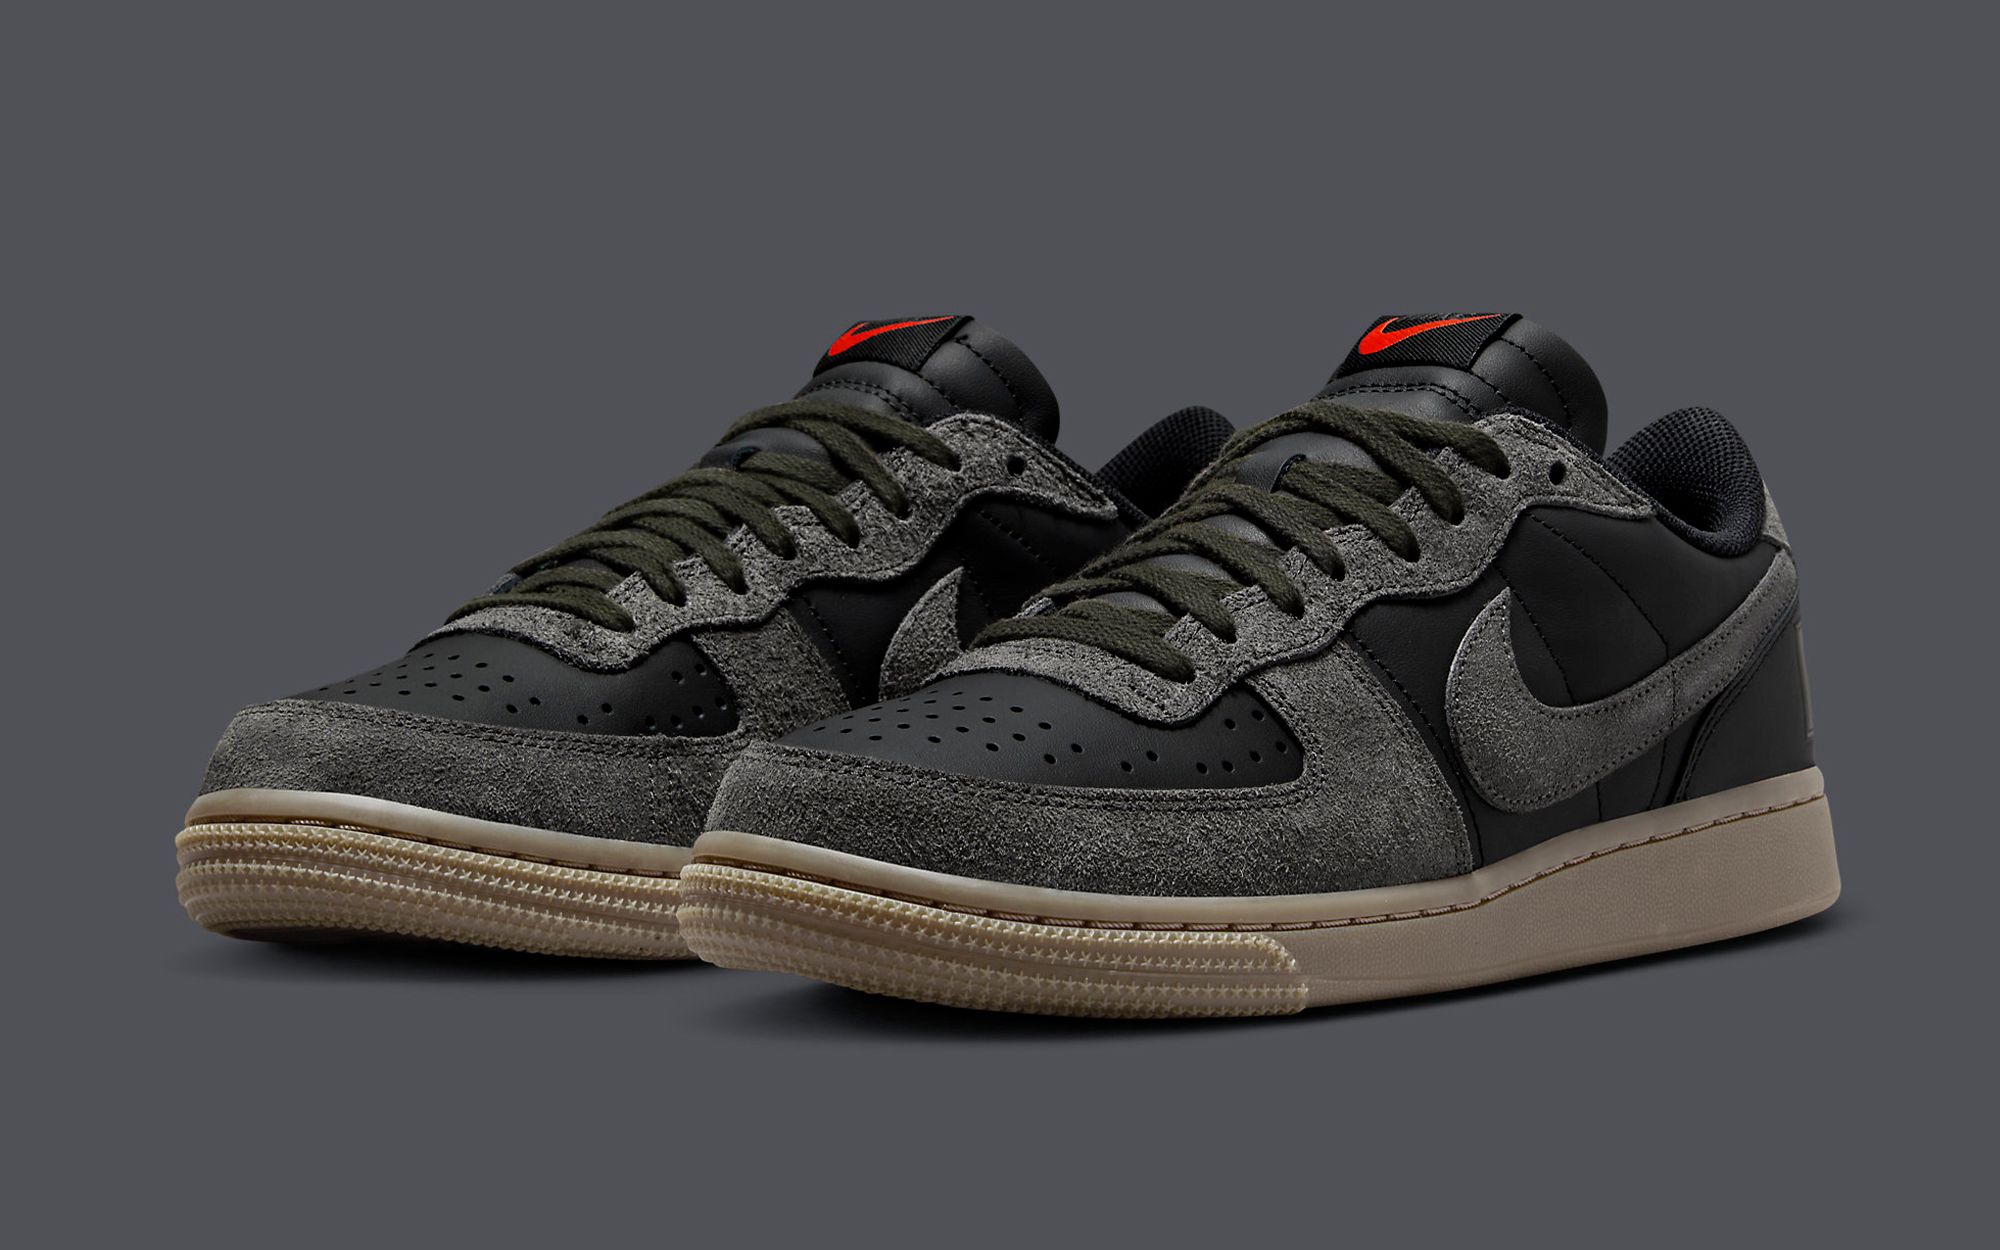 The Nike Terminator Low Surfaces in a Smokey Black and Medium